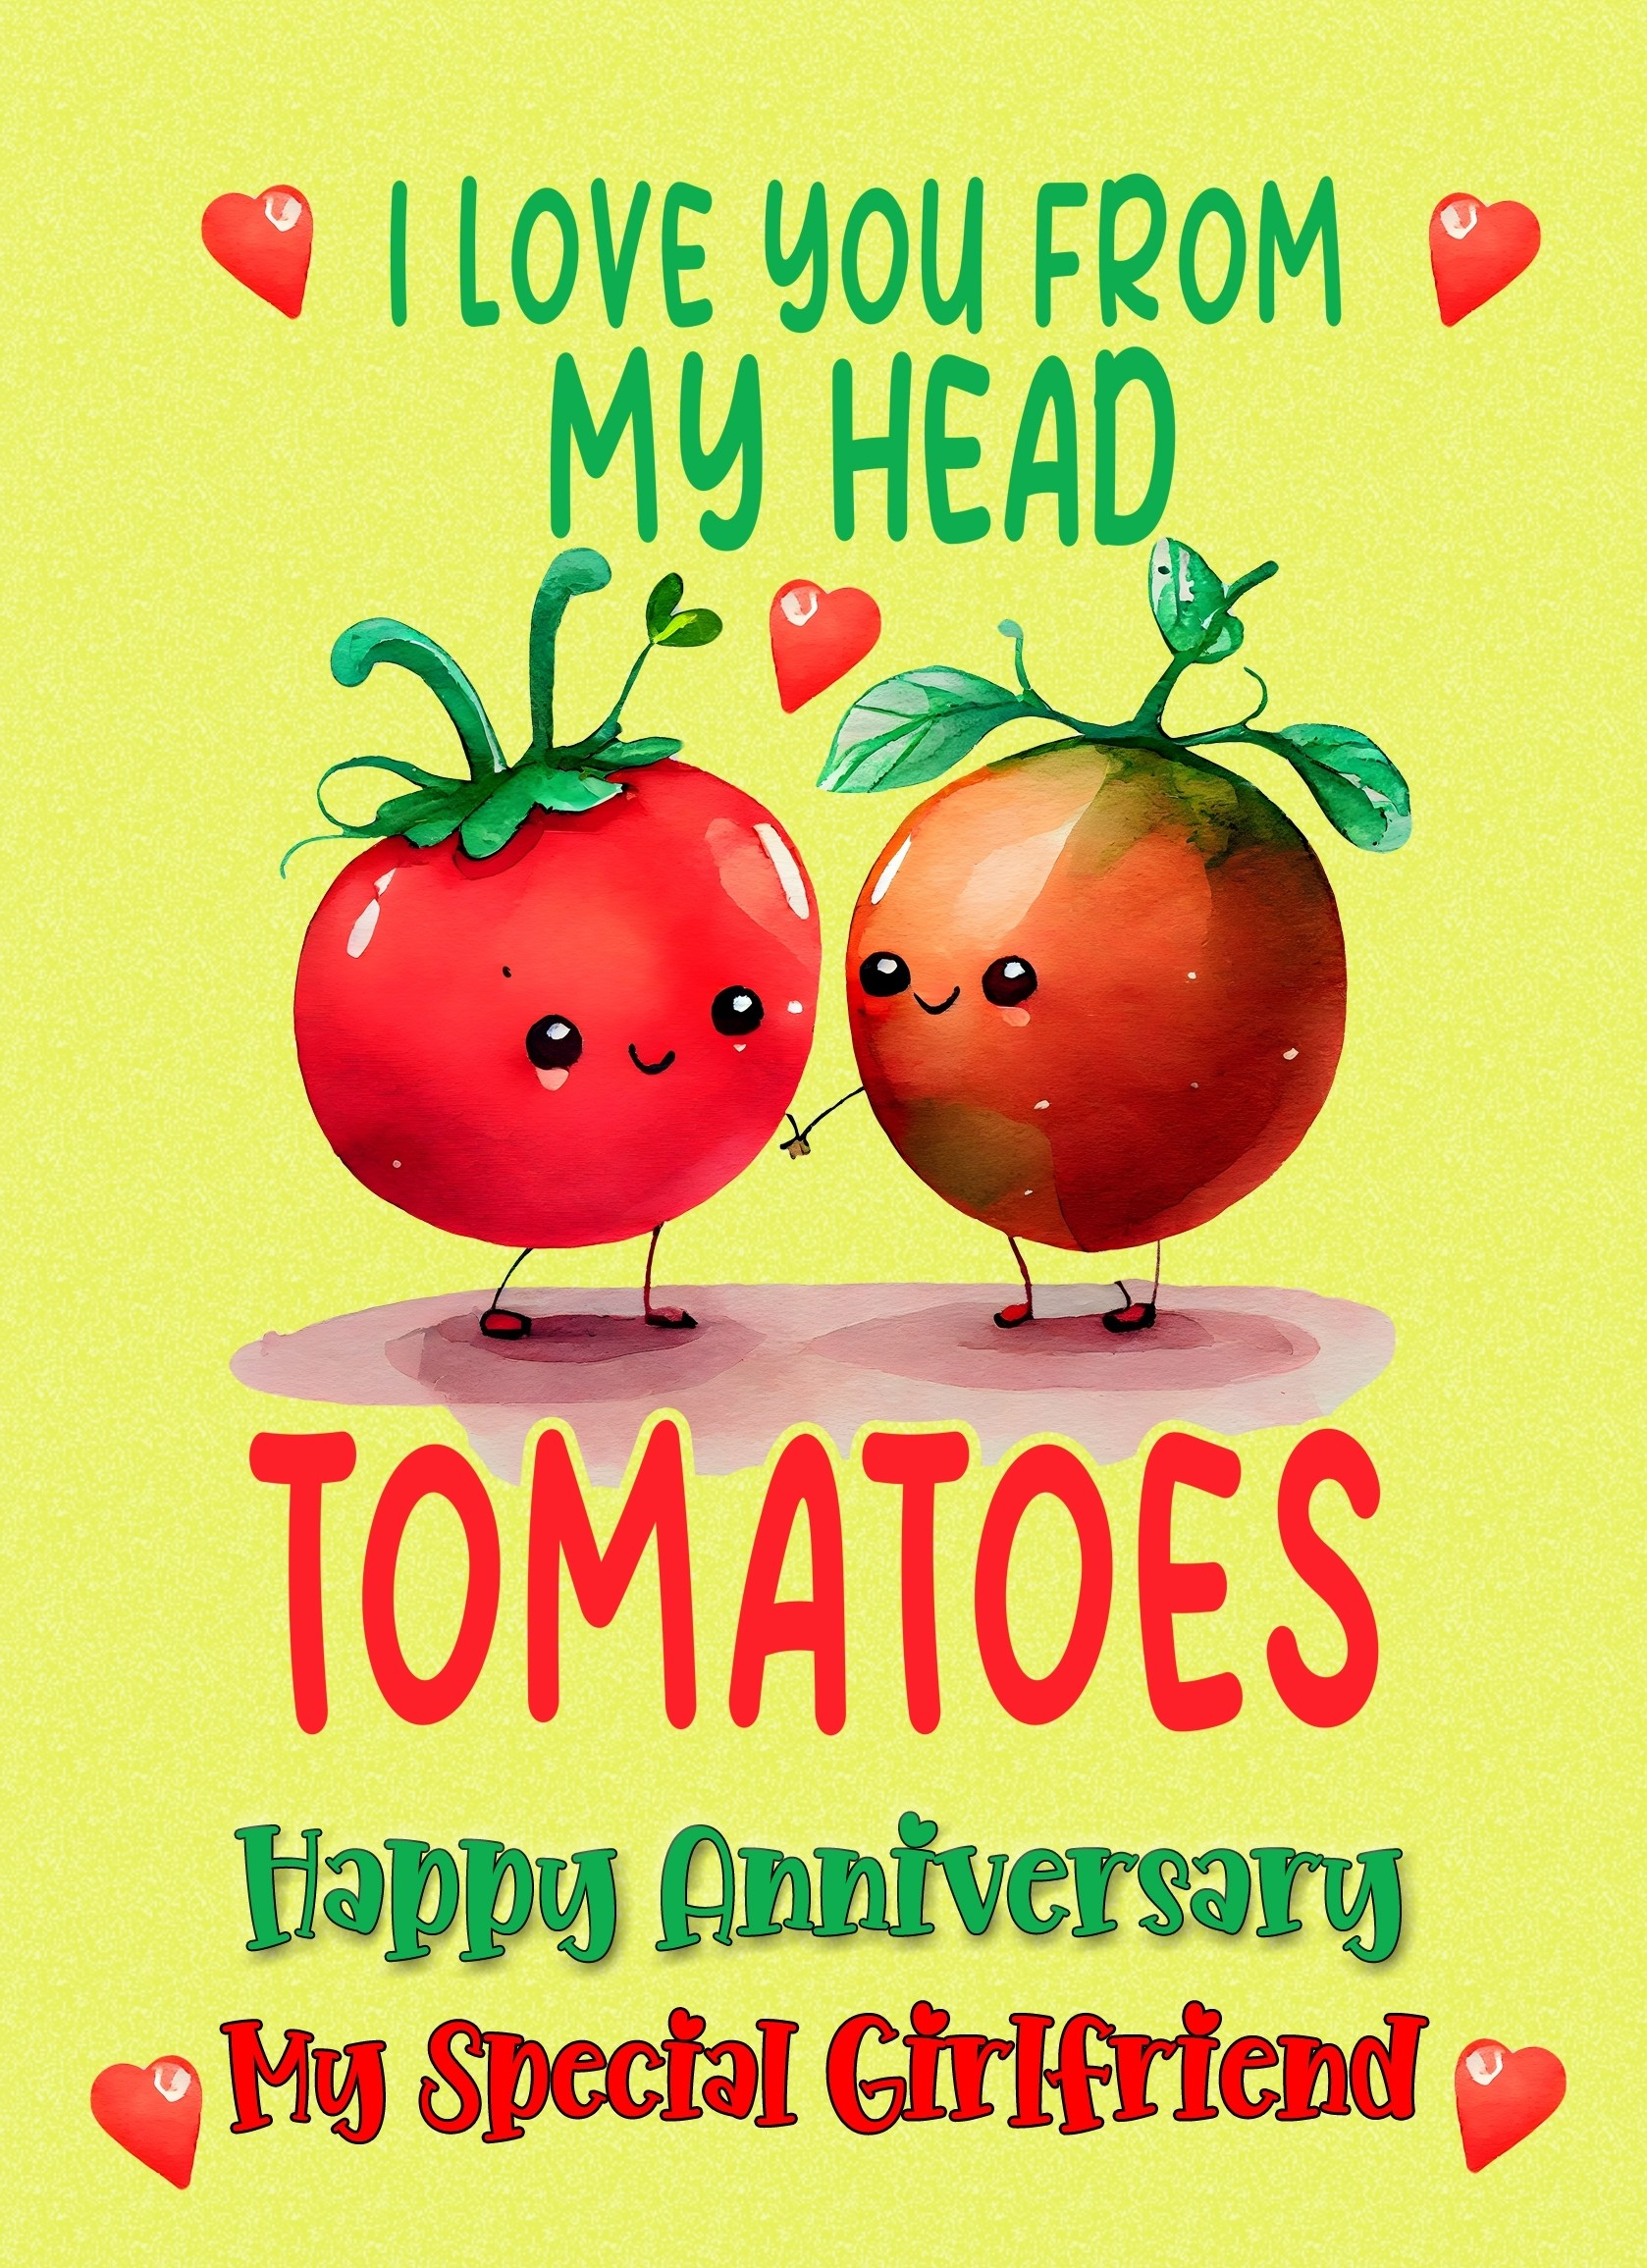 Funny Pun Romantic Anniversary Card for Girlfriend (Tomatoes)